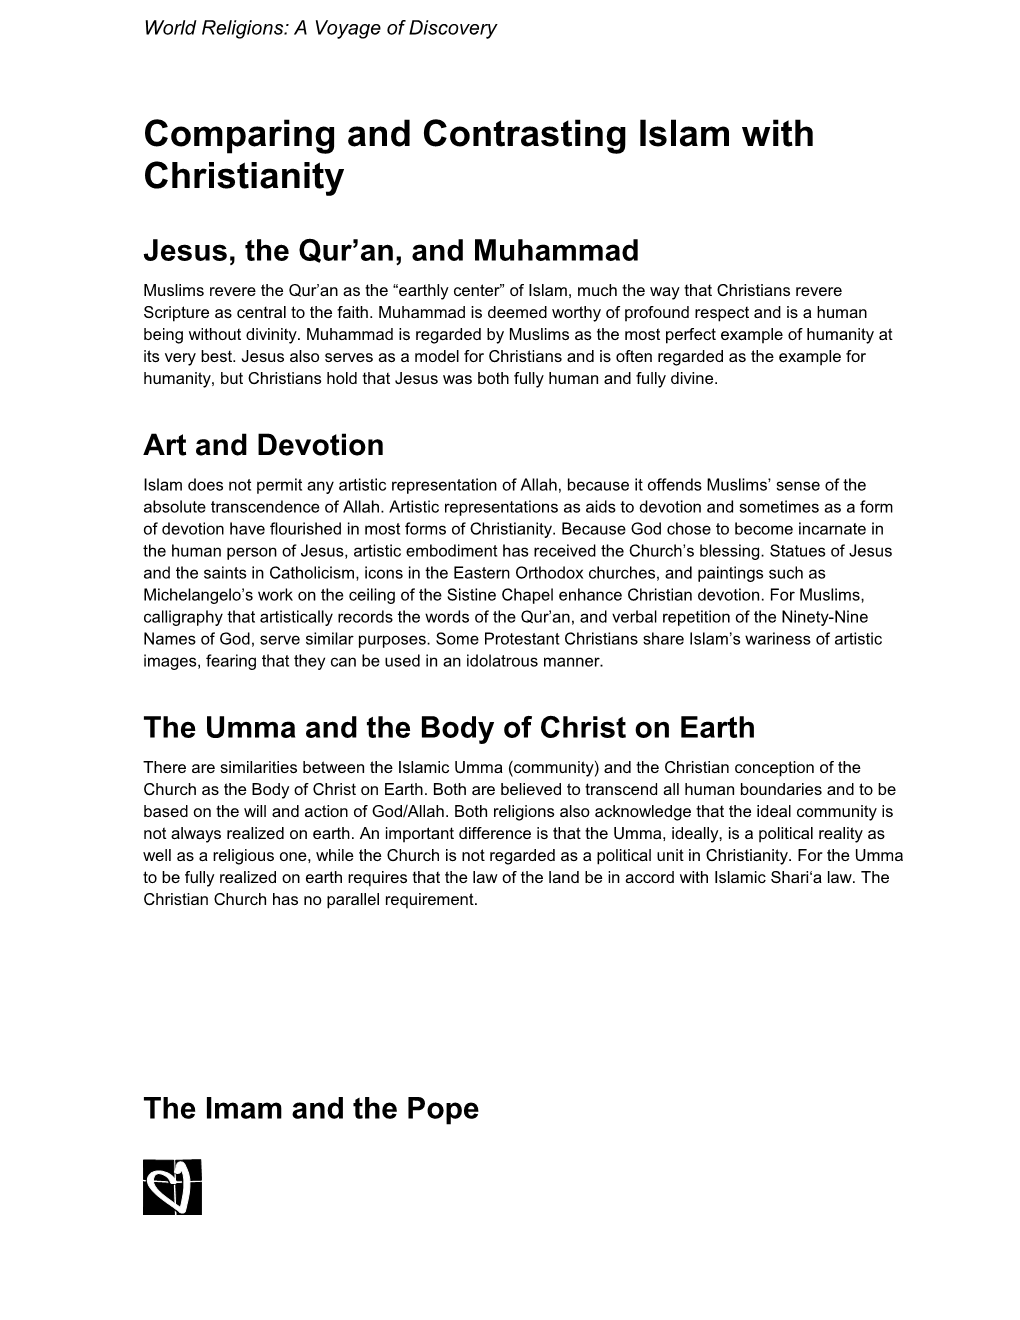 Comparing and Contrasting Islam with Christianity